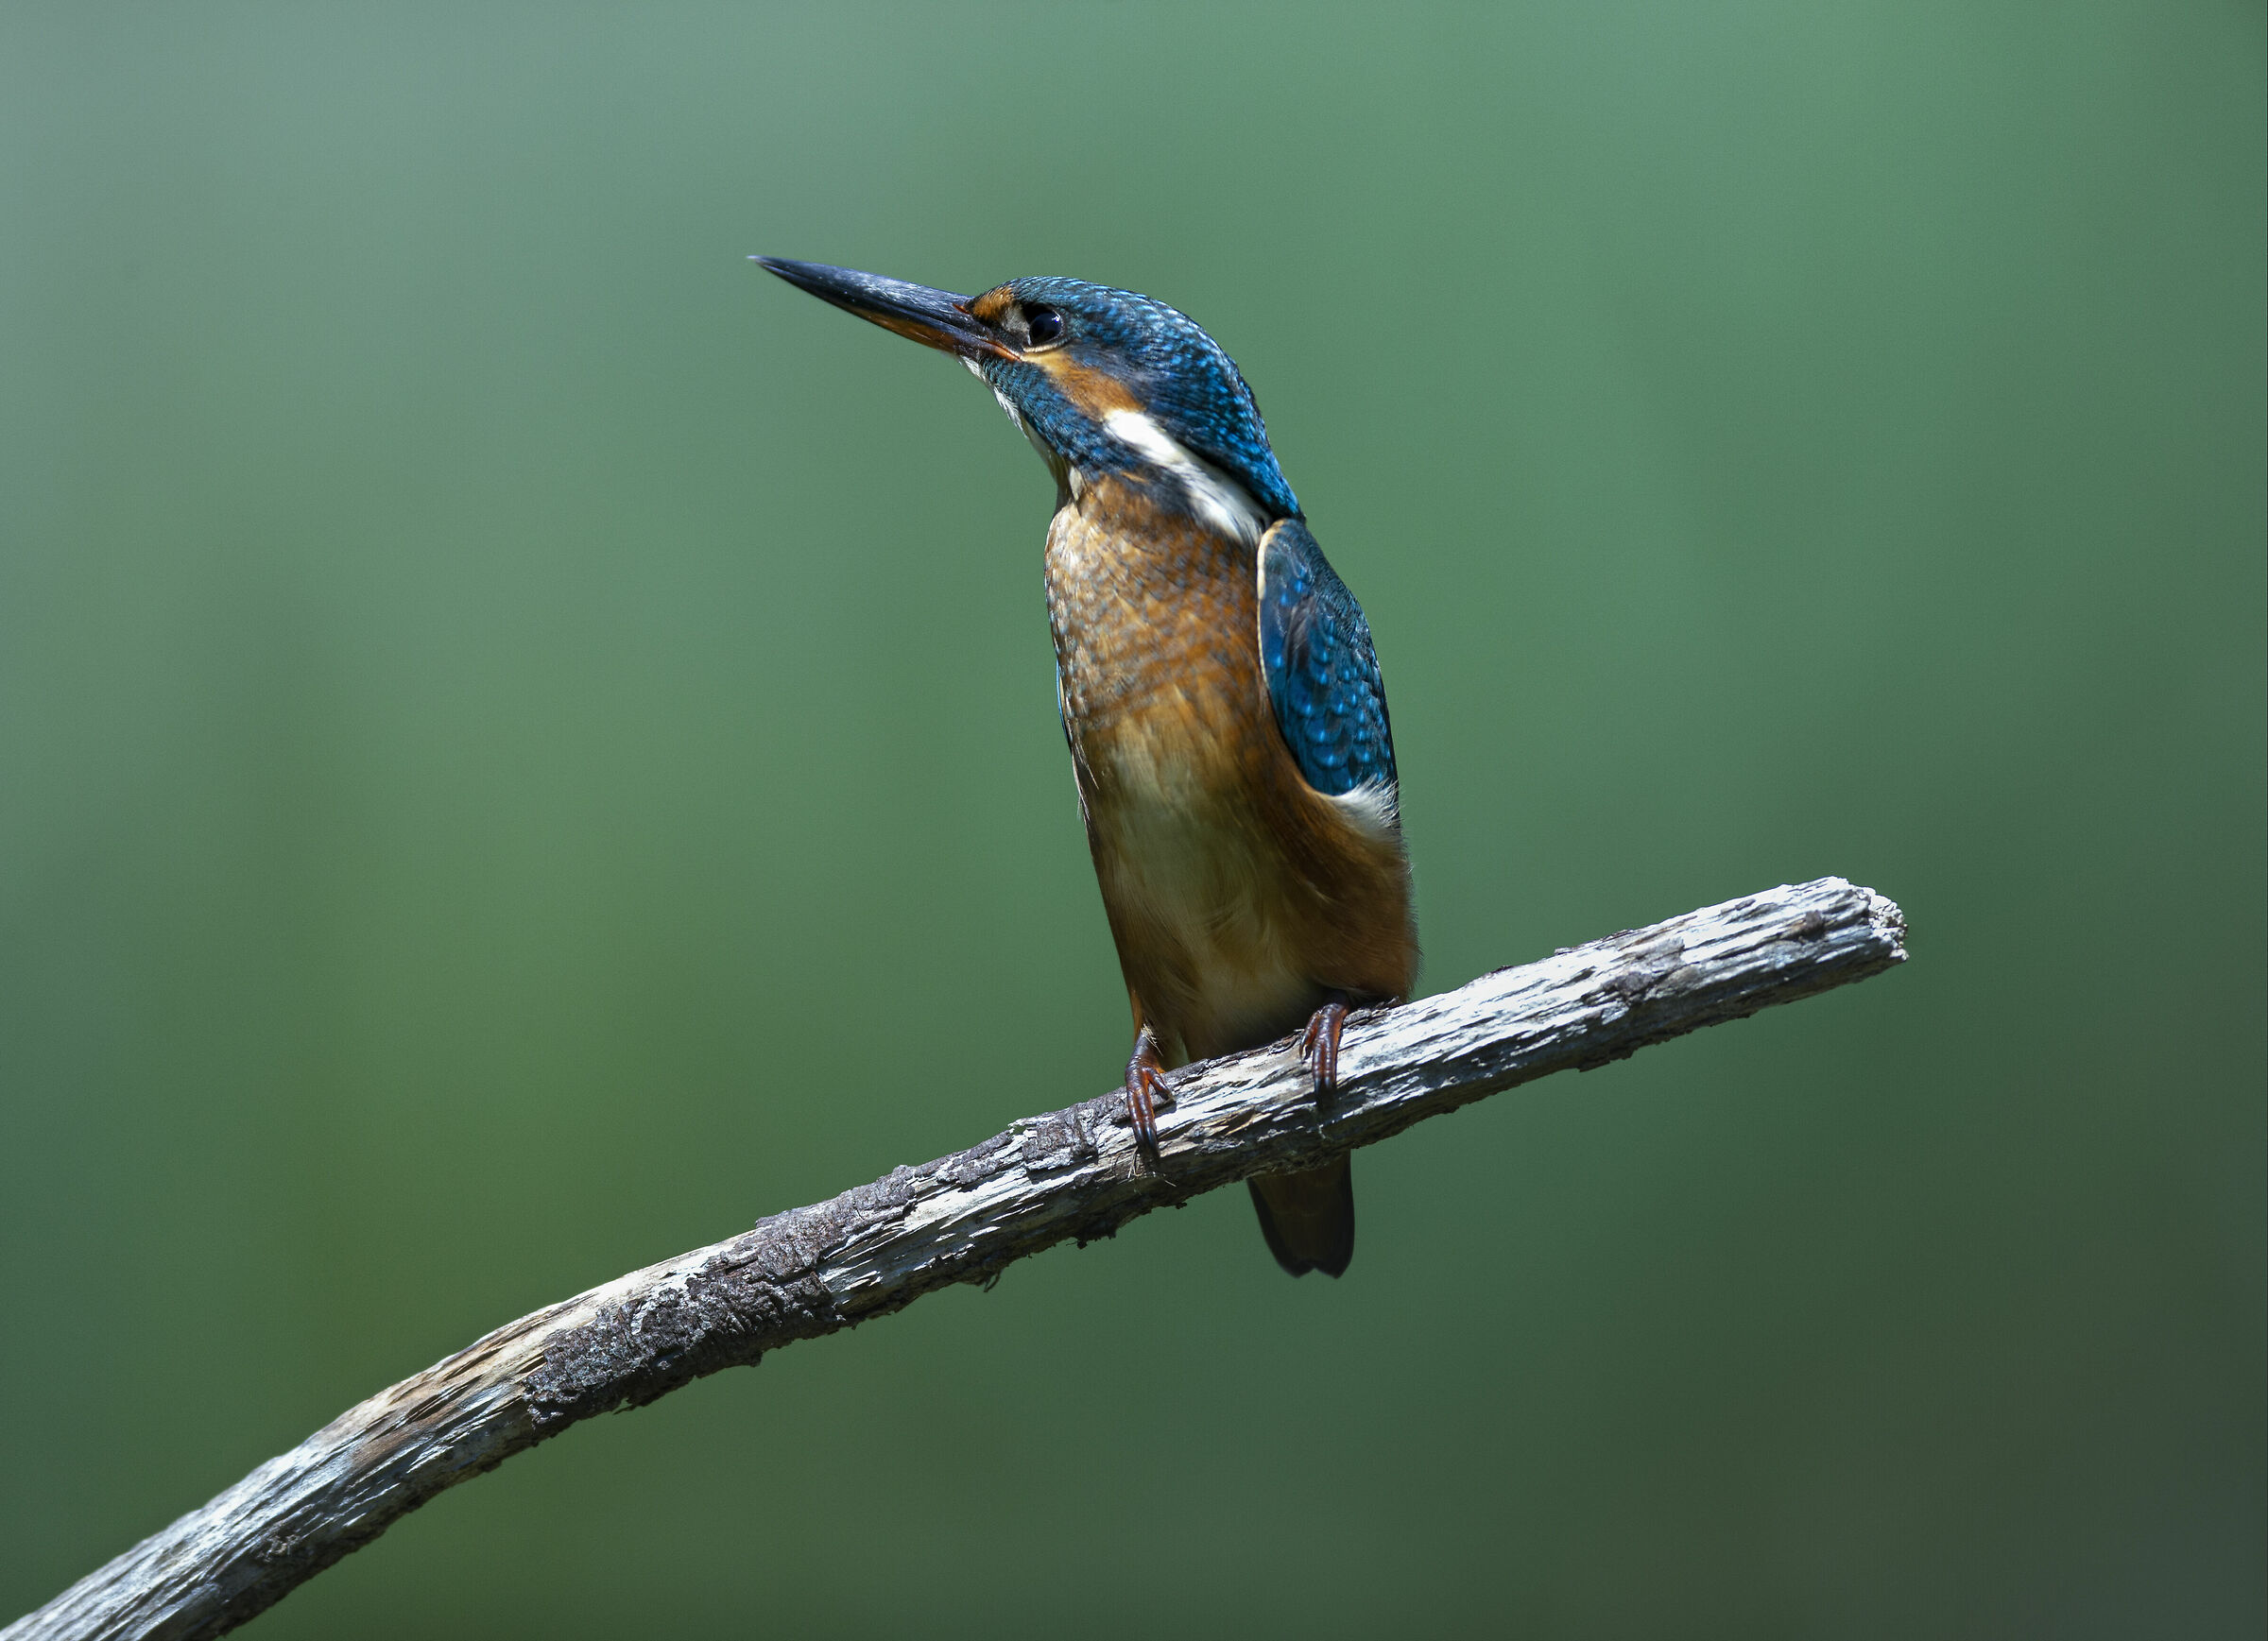 The King Fisher...